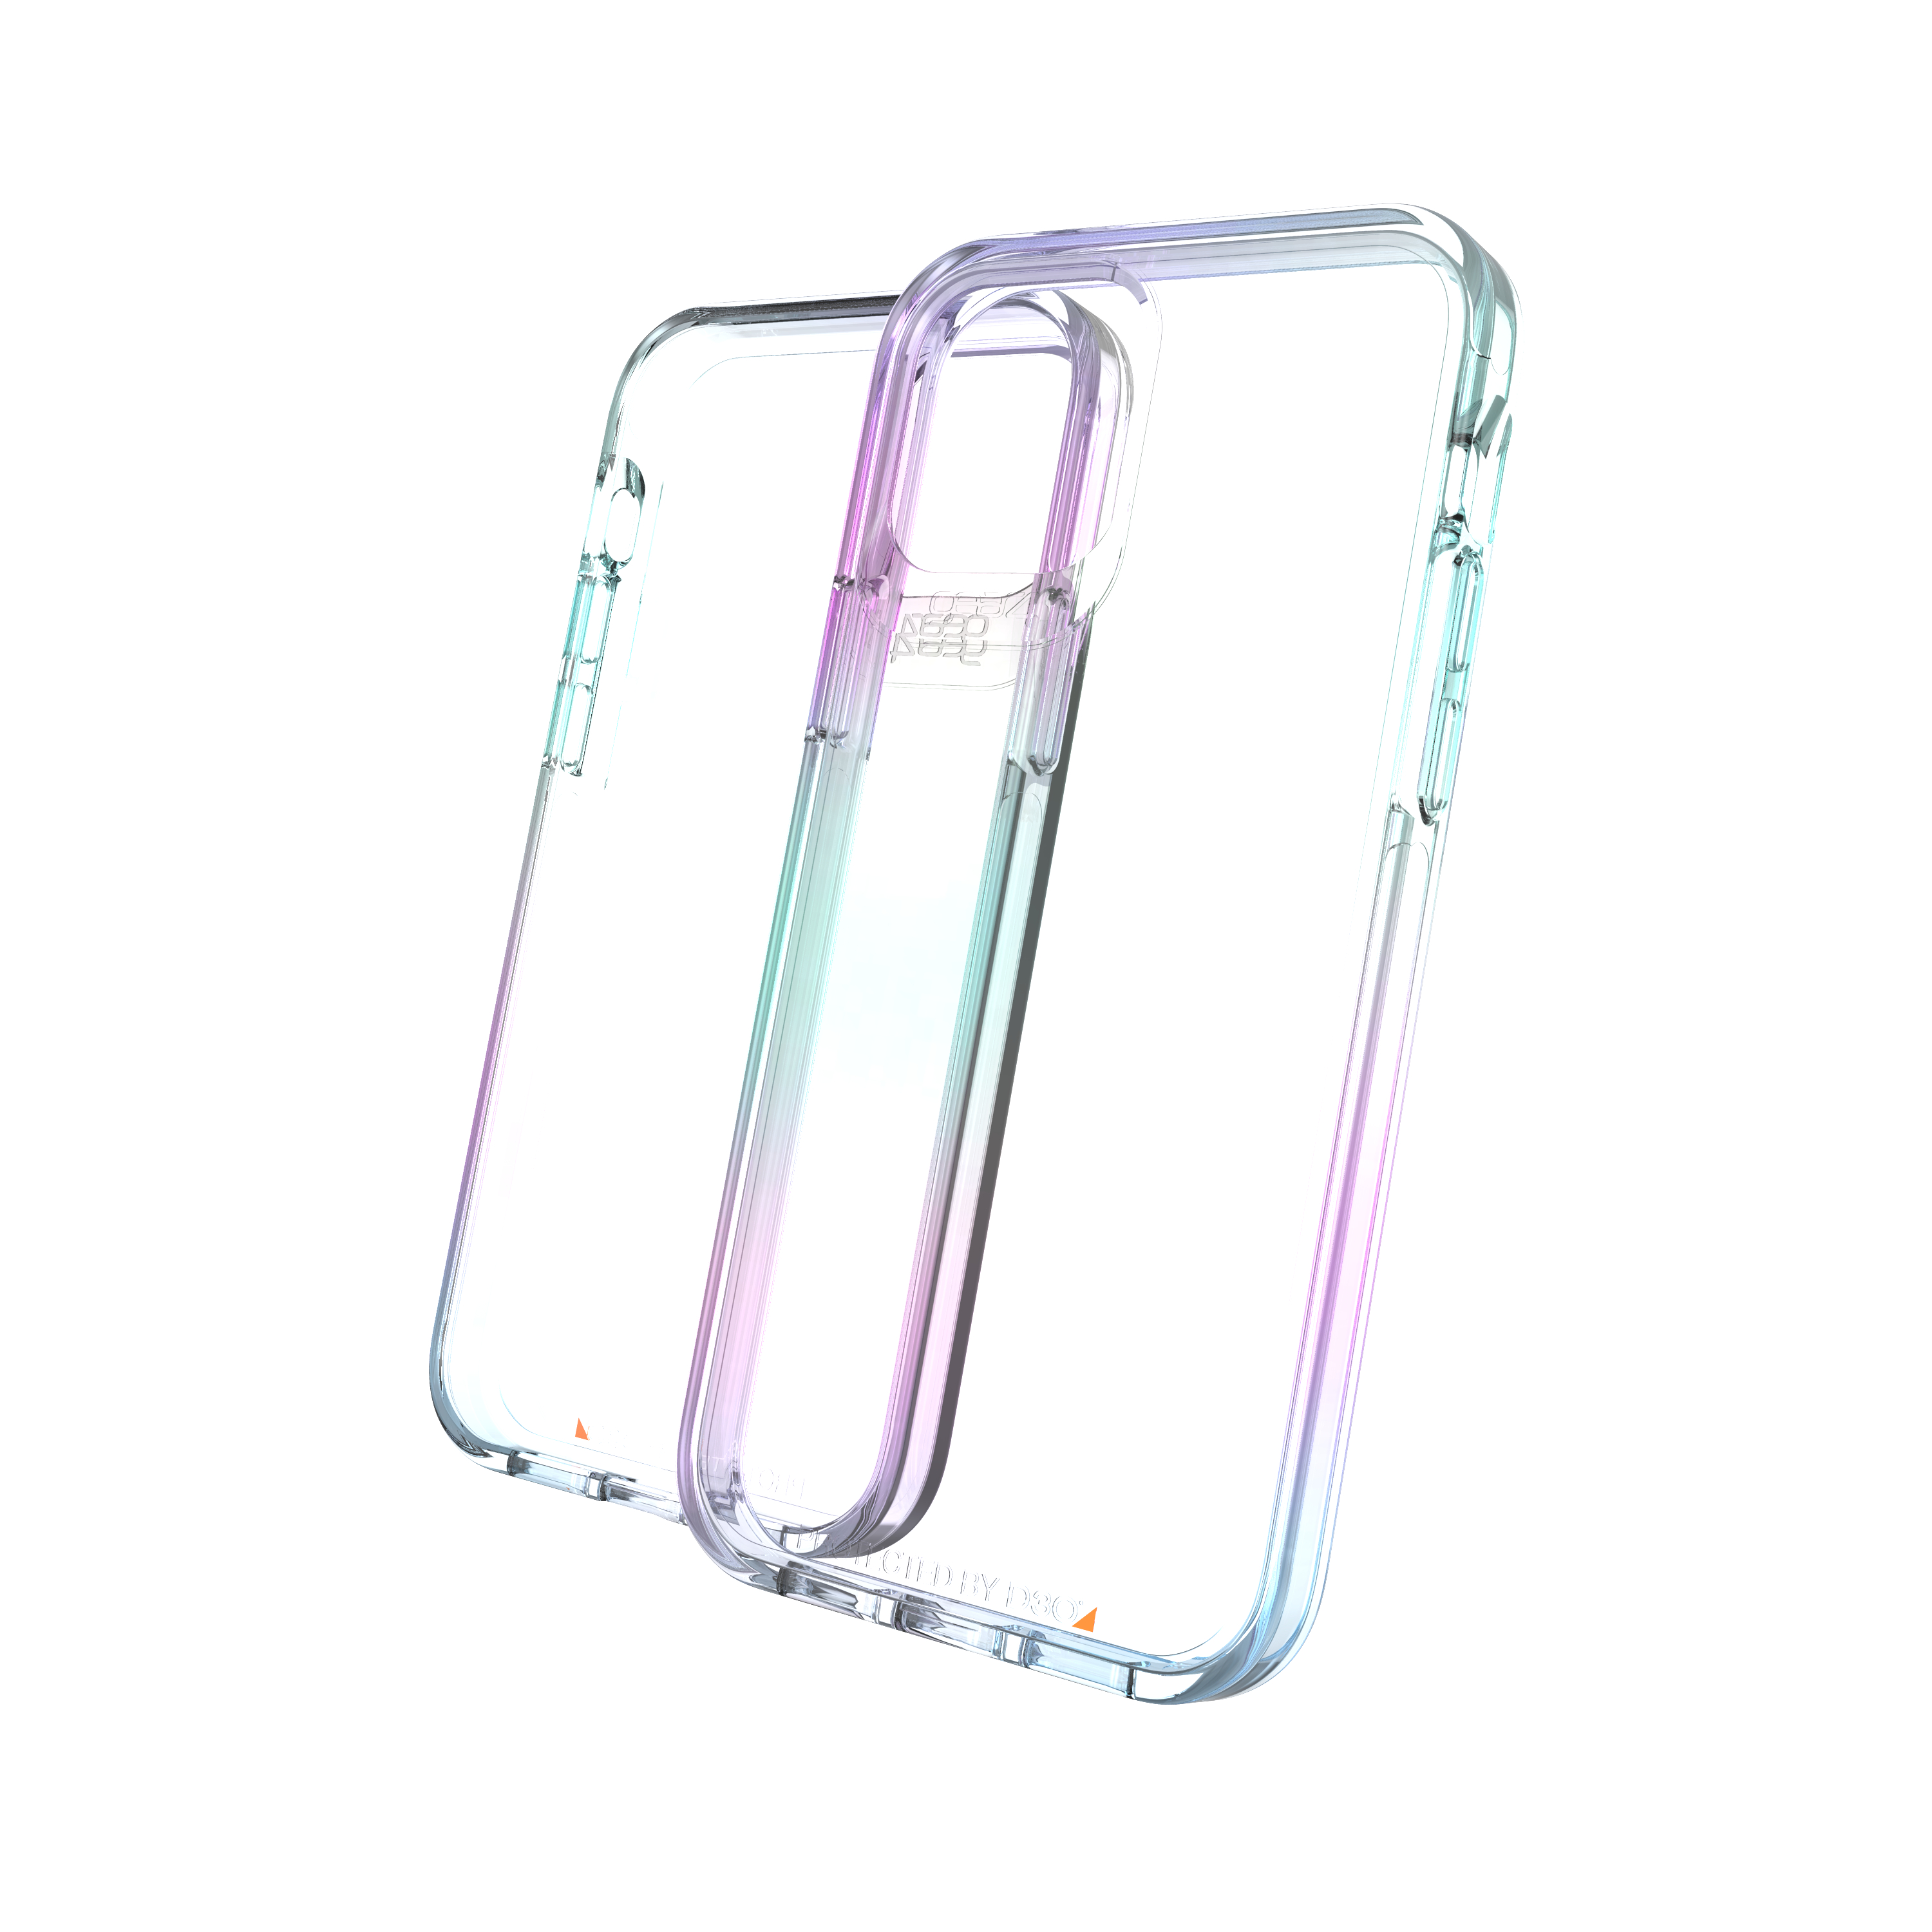 iPhone Pro, Iridescent Apple, GEAR4 D3O Backcover, Crystal 12/12 Palace,